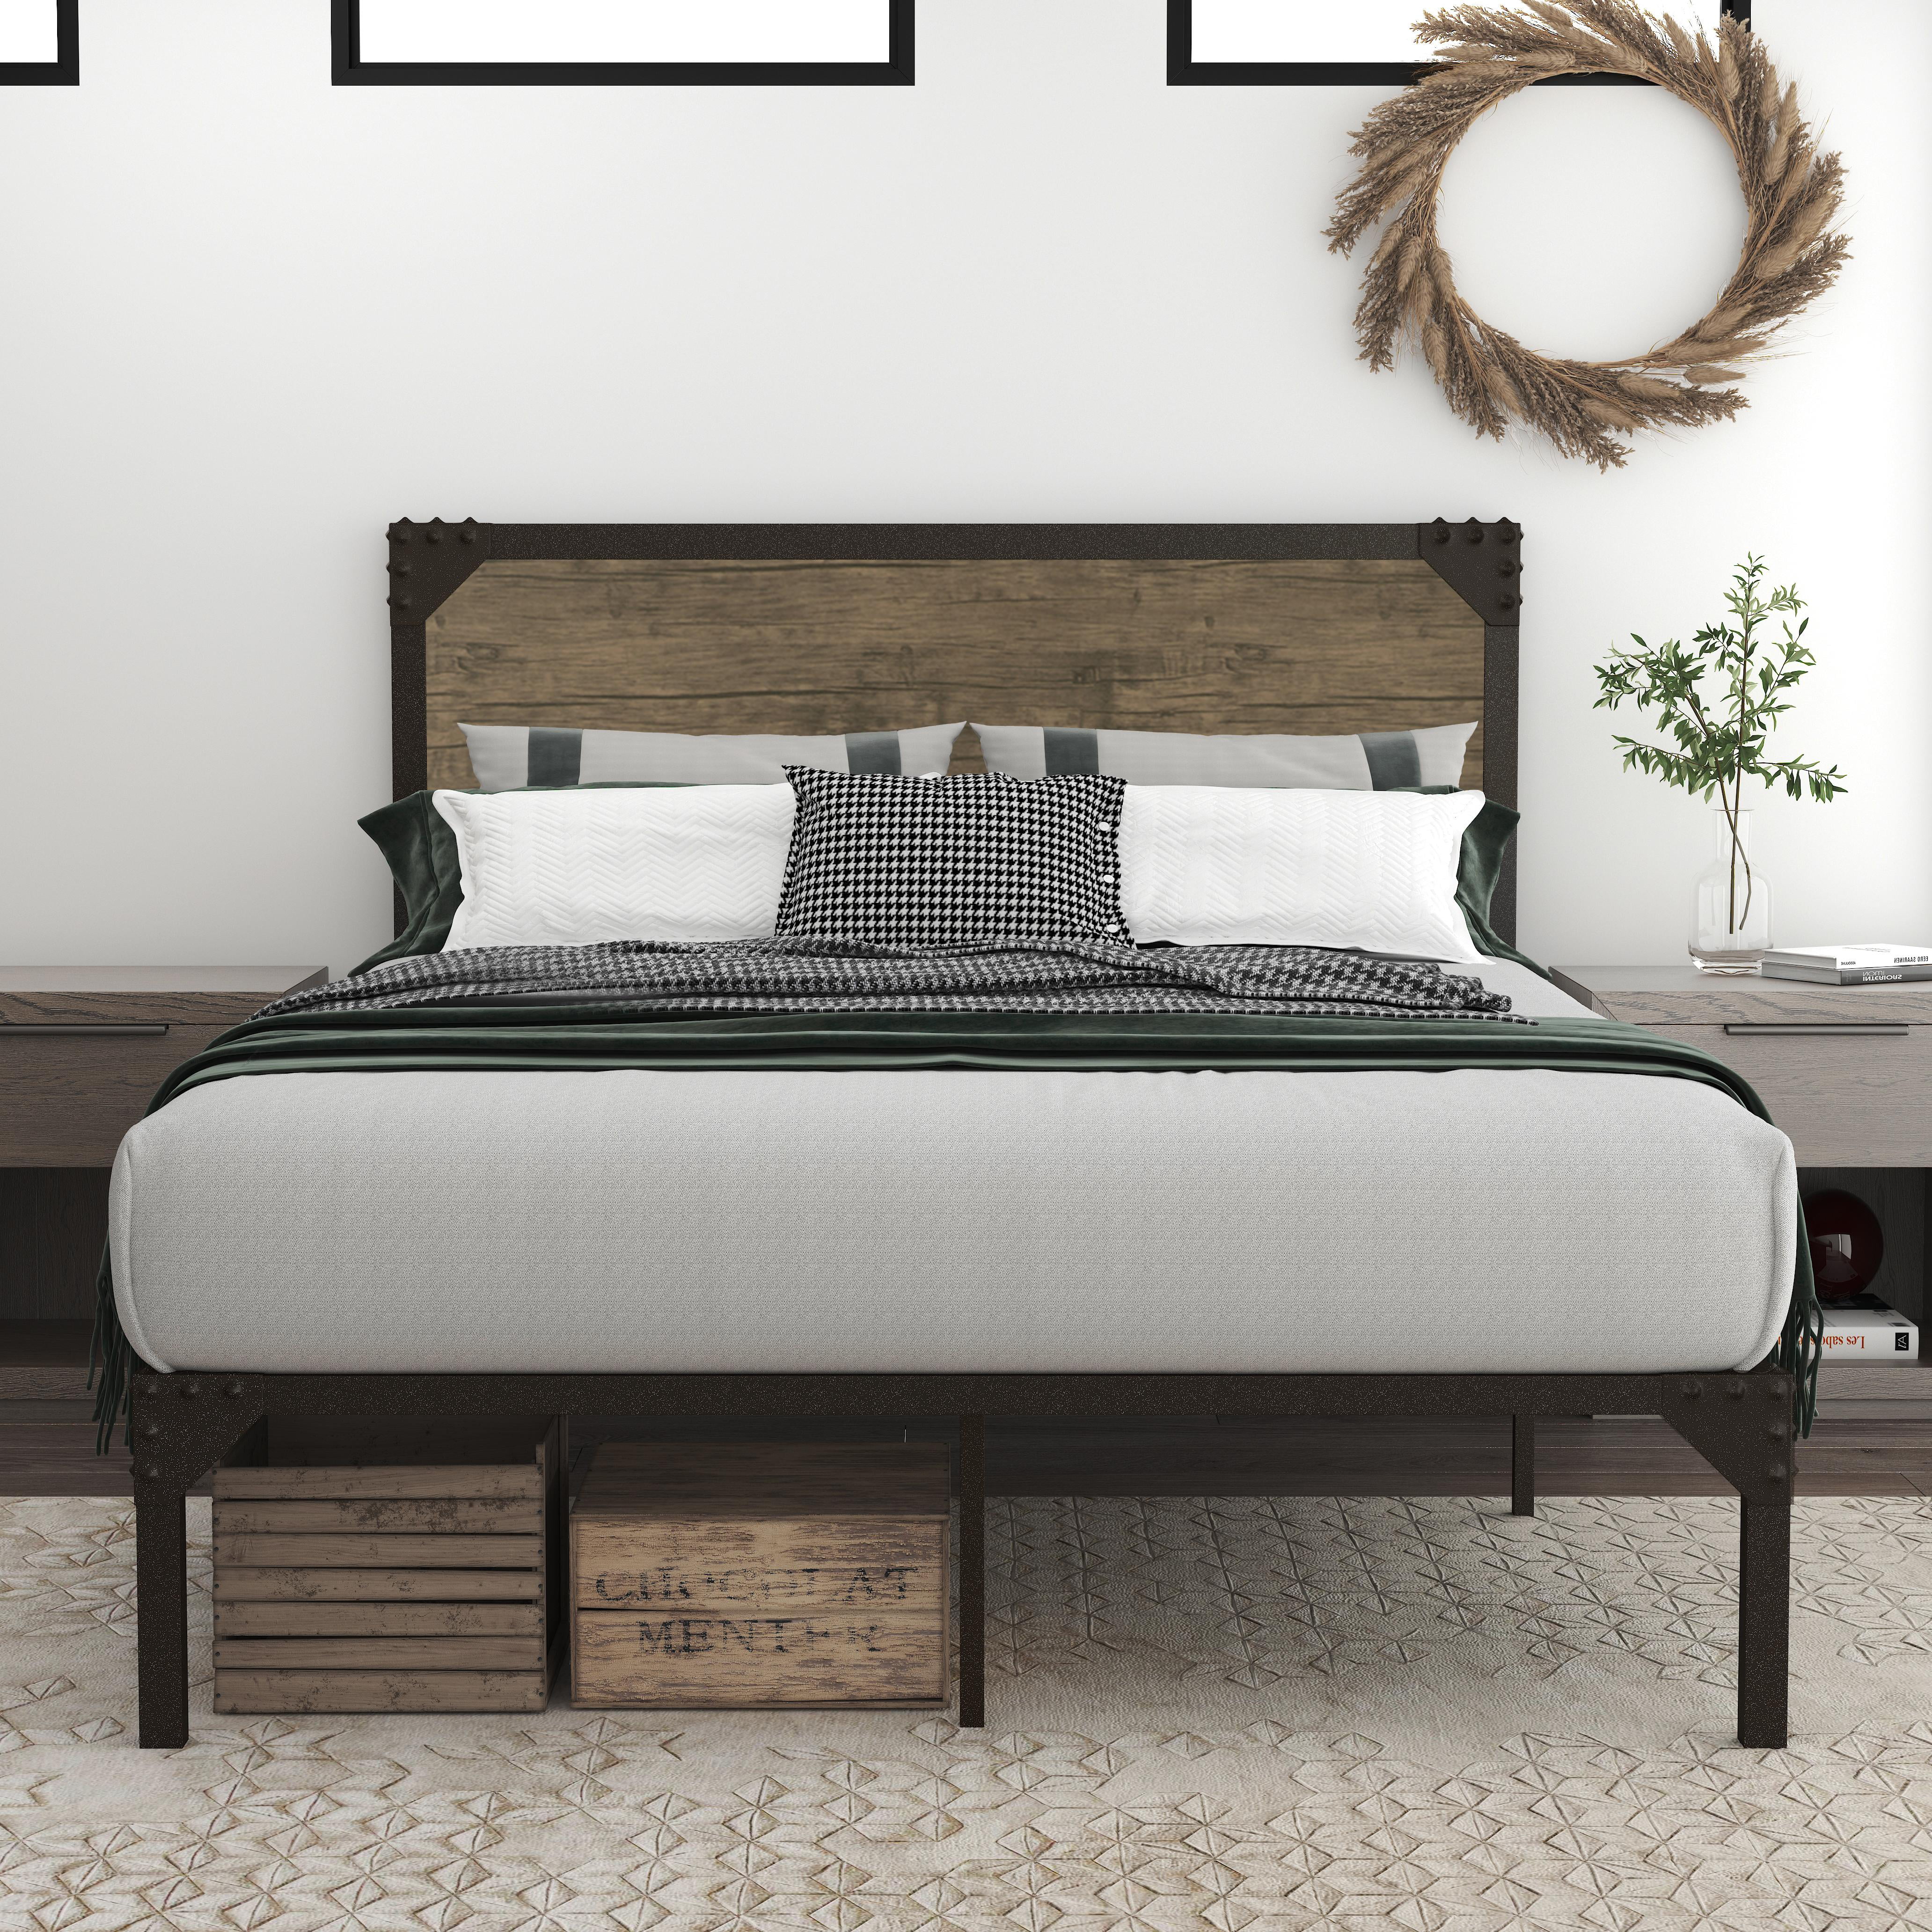 Glideaway Gs 3 Xs Universal Center, Glideaway X Support Bed Frame